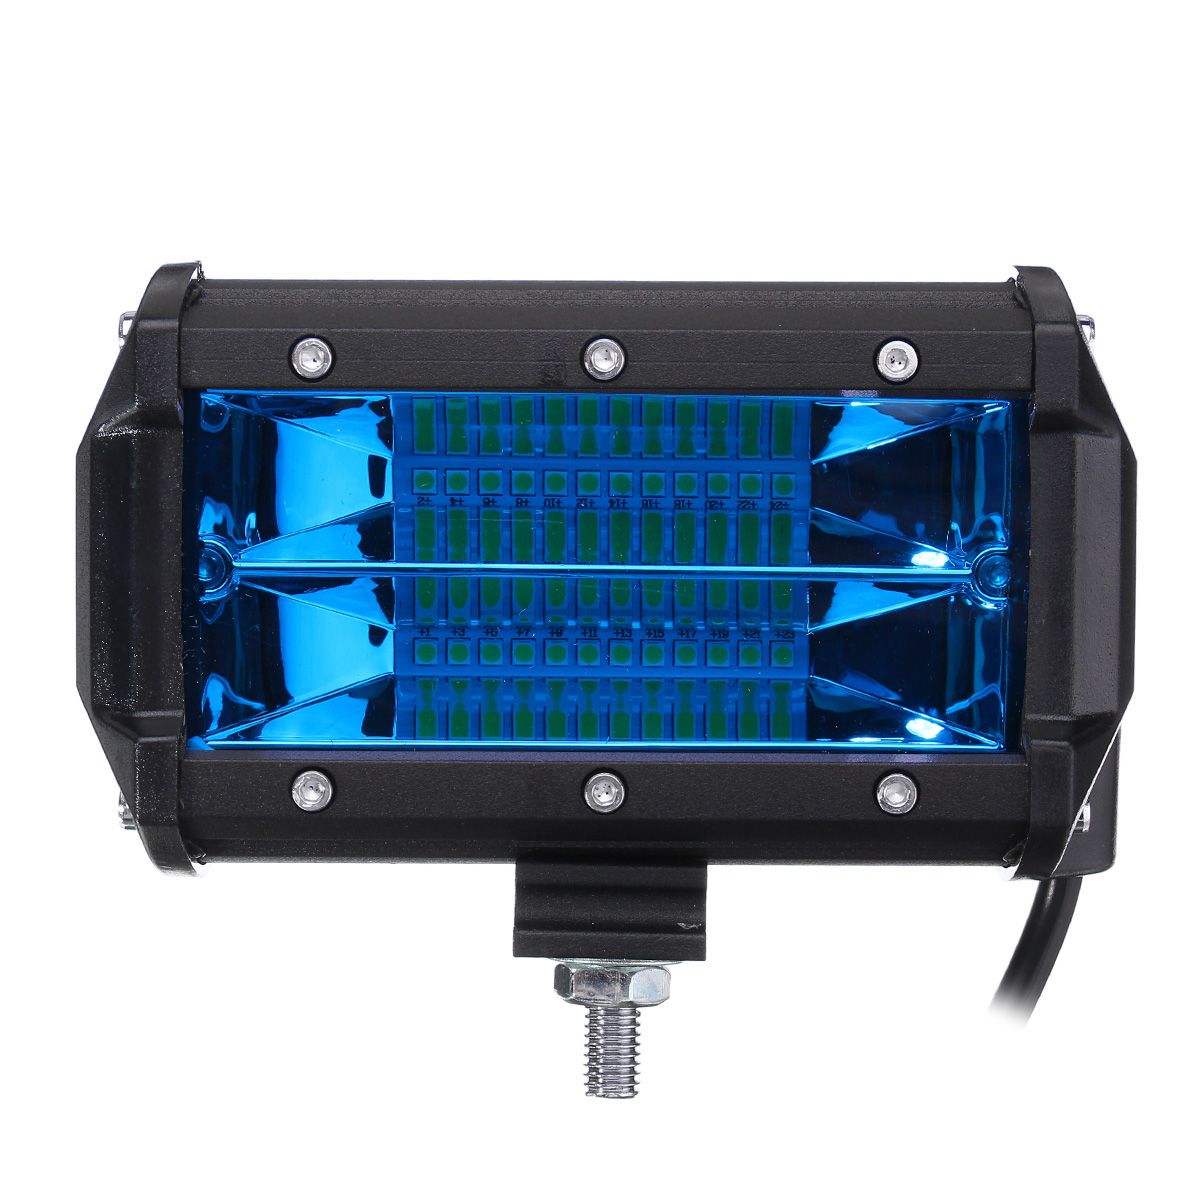 5Inch-48W-24-LED-Work-Light-Bar-Flood-Beam-Lamp-for-Car-SUV-Boat-Driving-Offroad-ATV-1427252